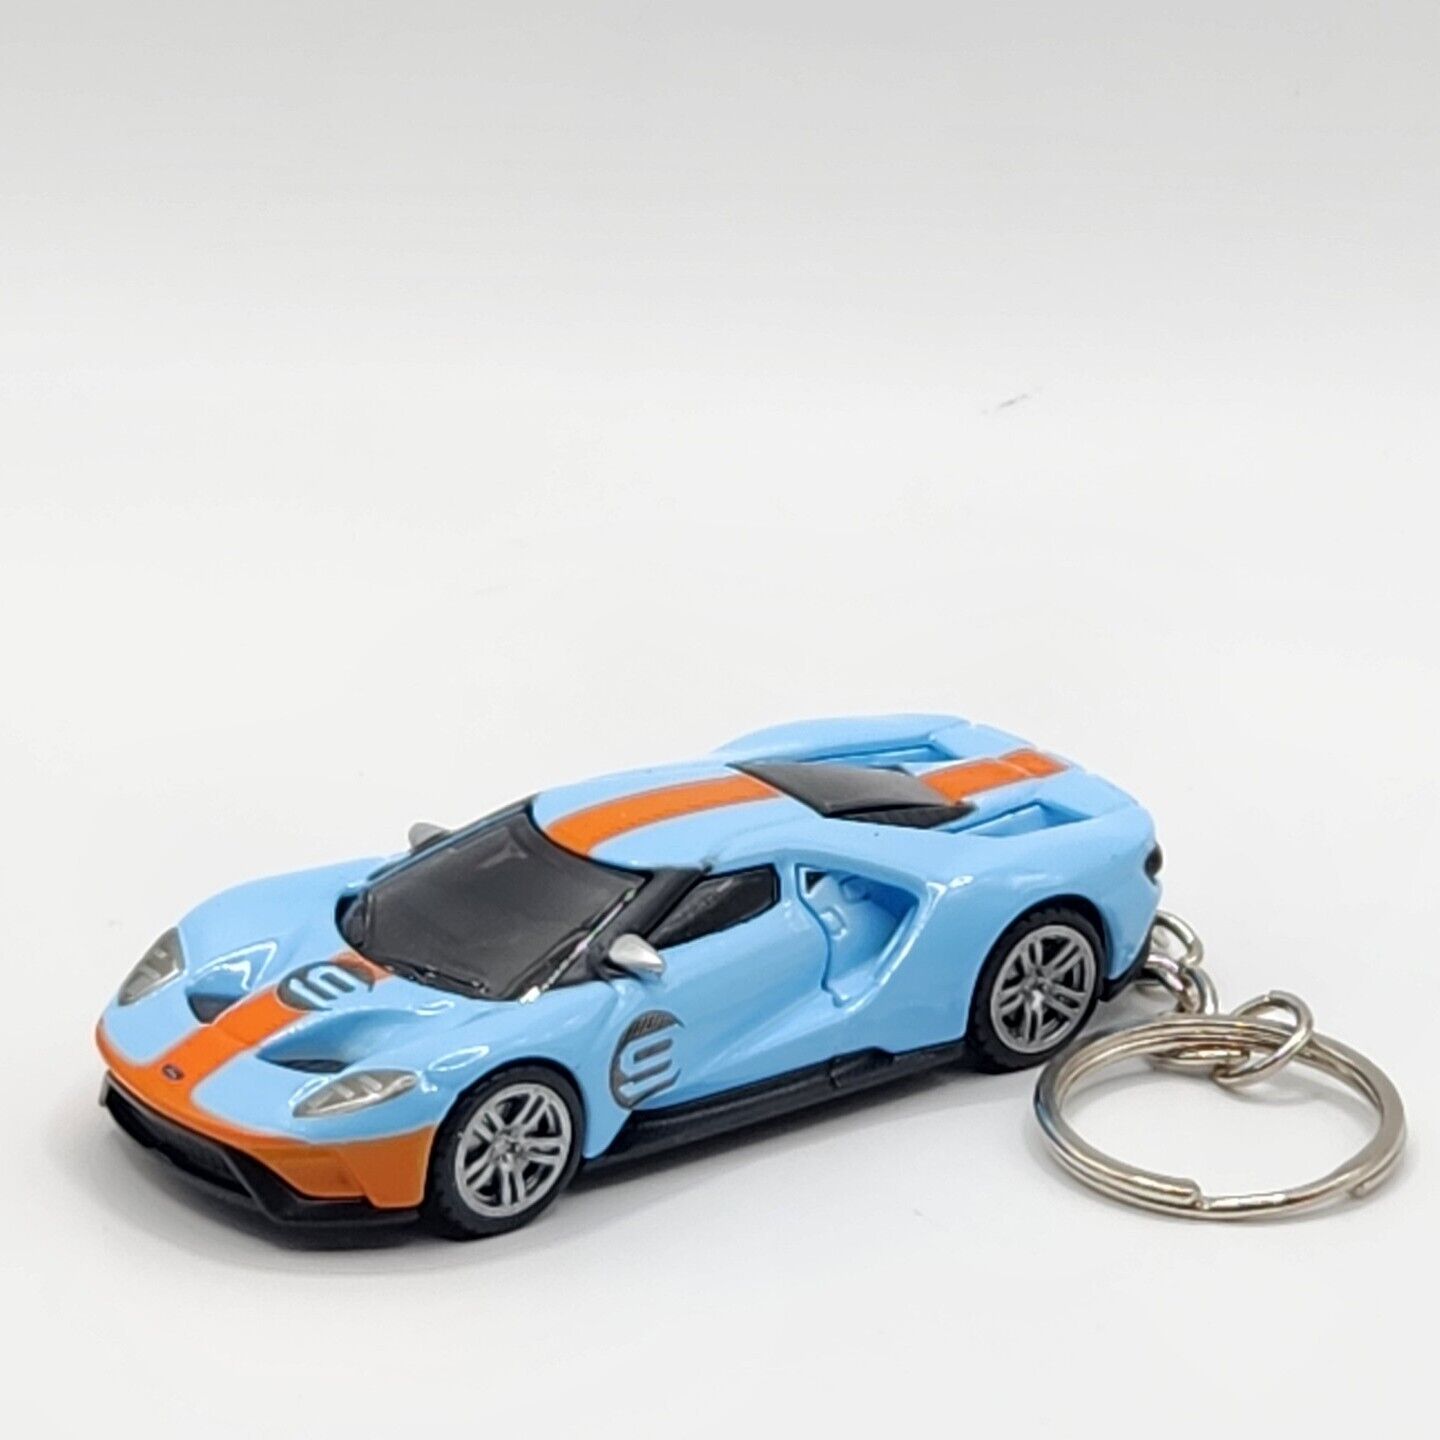 Custom Keychain Fits 2017 Ford GT 1/64 Scale Great Gift 🎁 